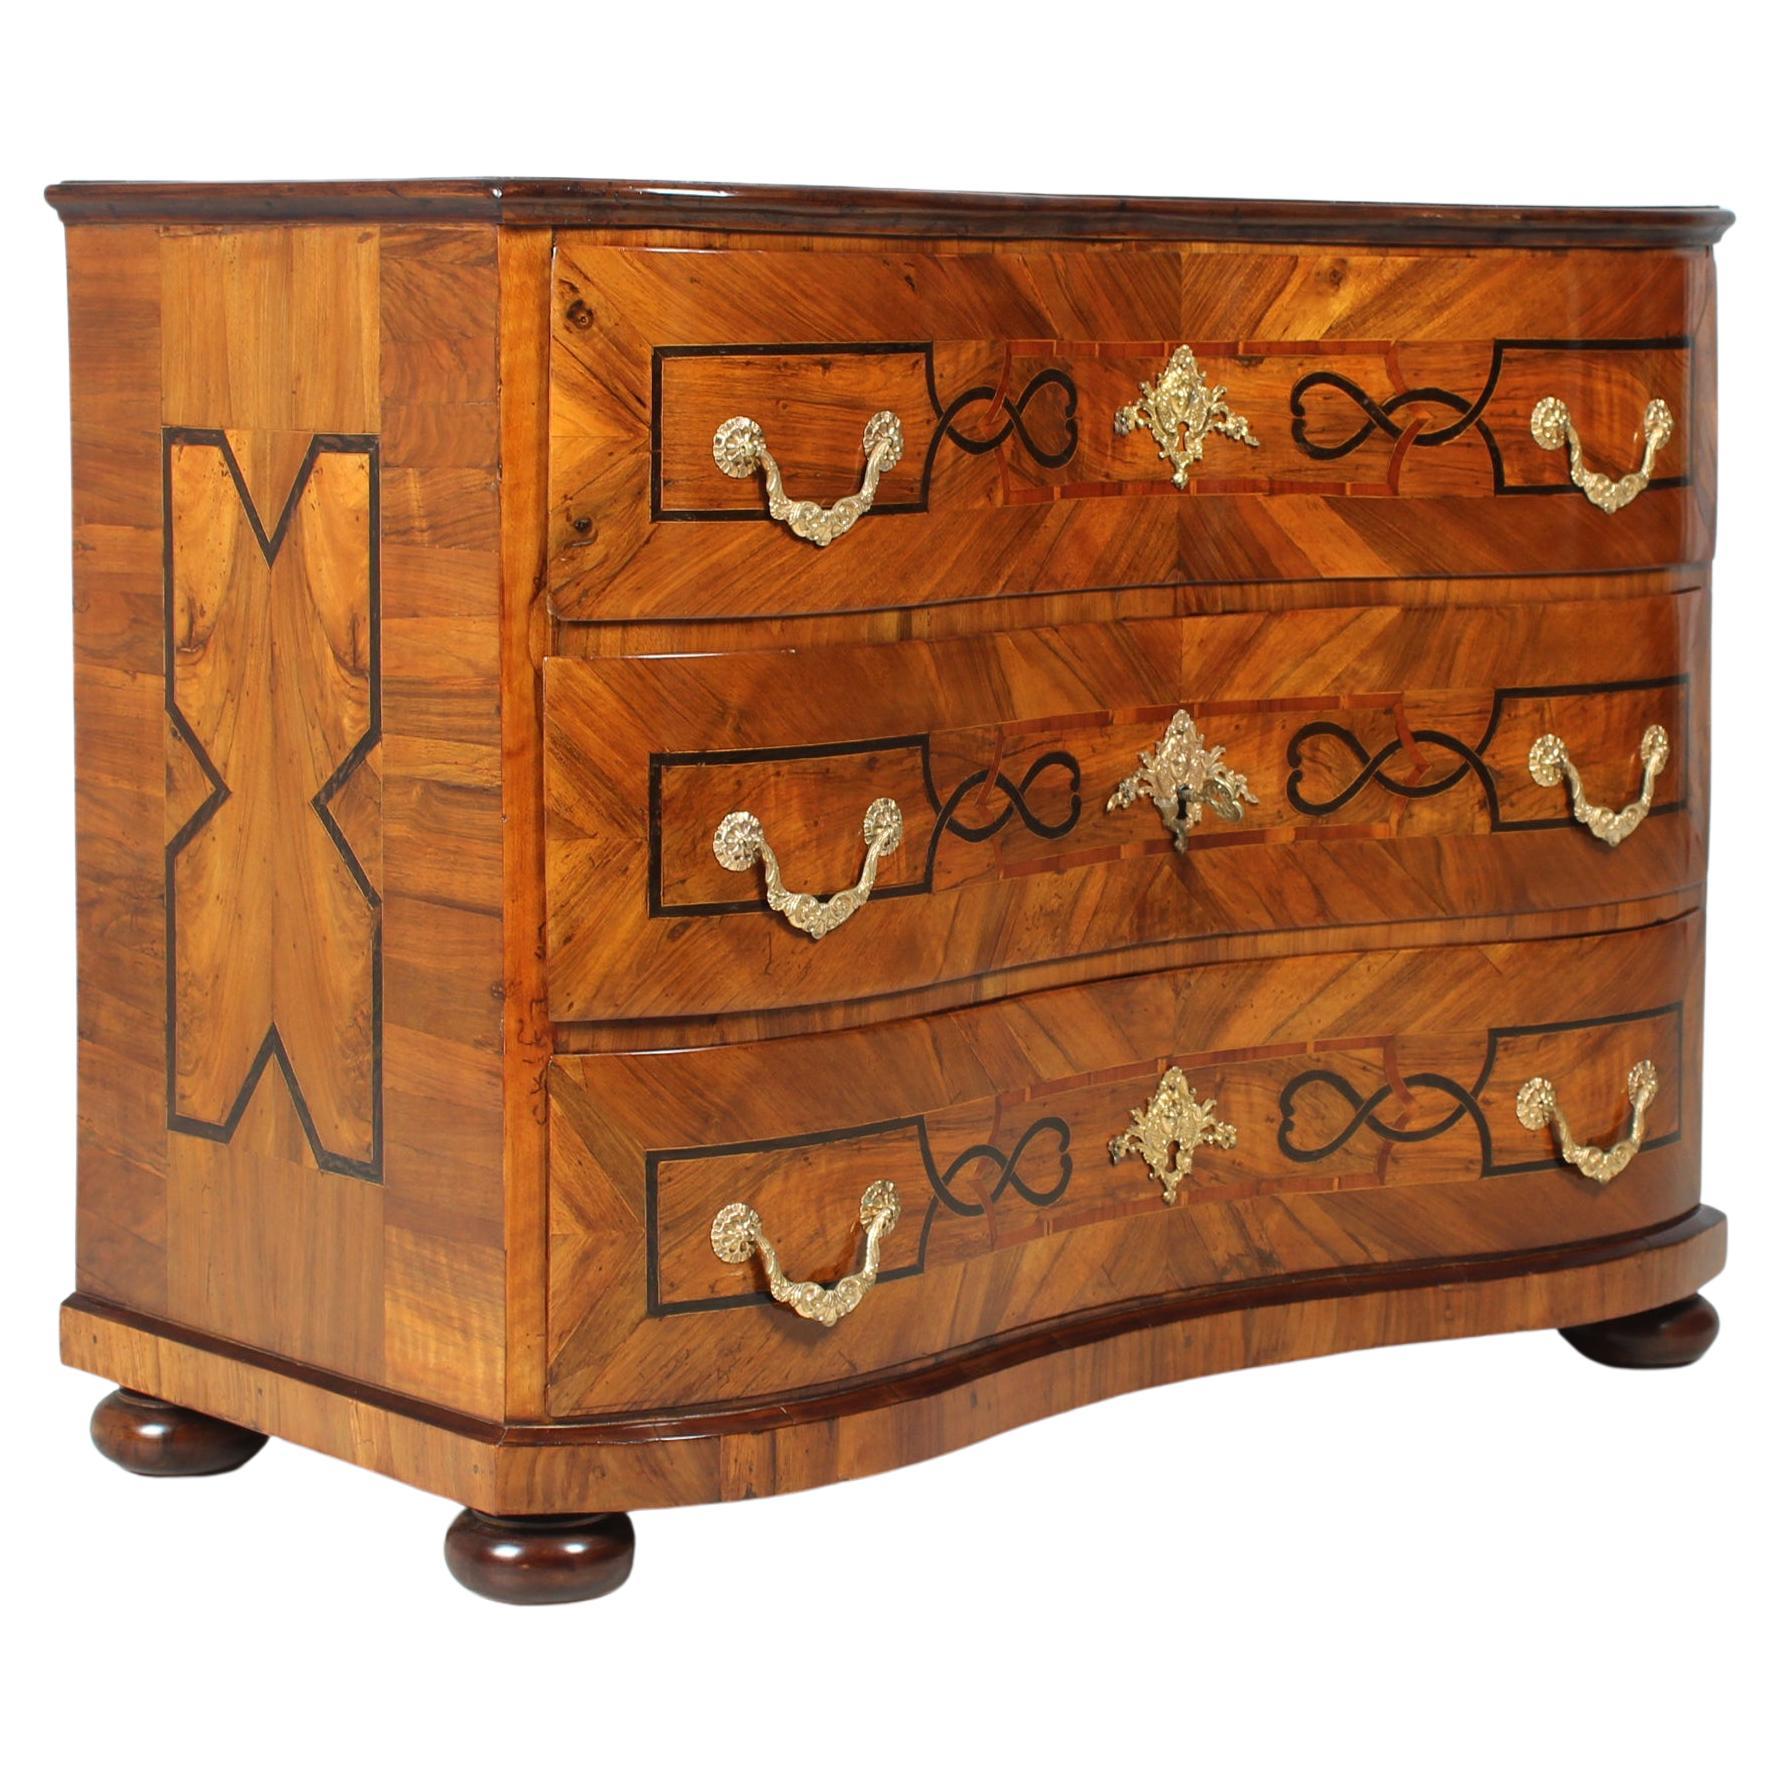 18th Century German Baroque Chest Of Drawers, Special Locking System, Circa 1750